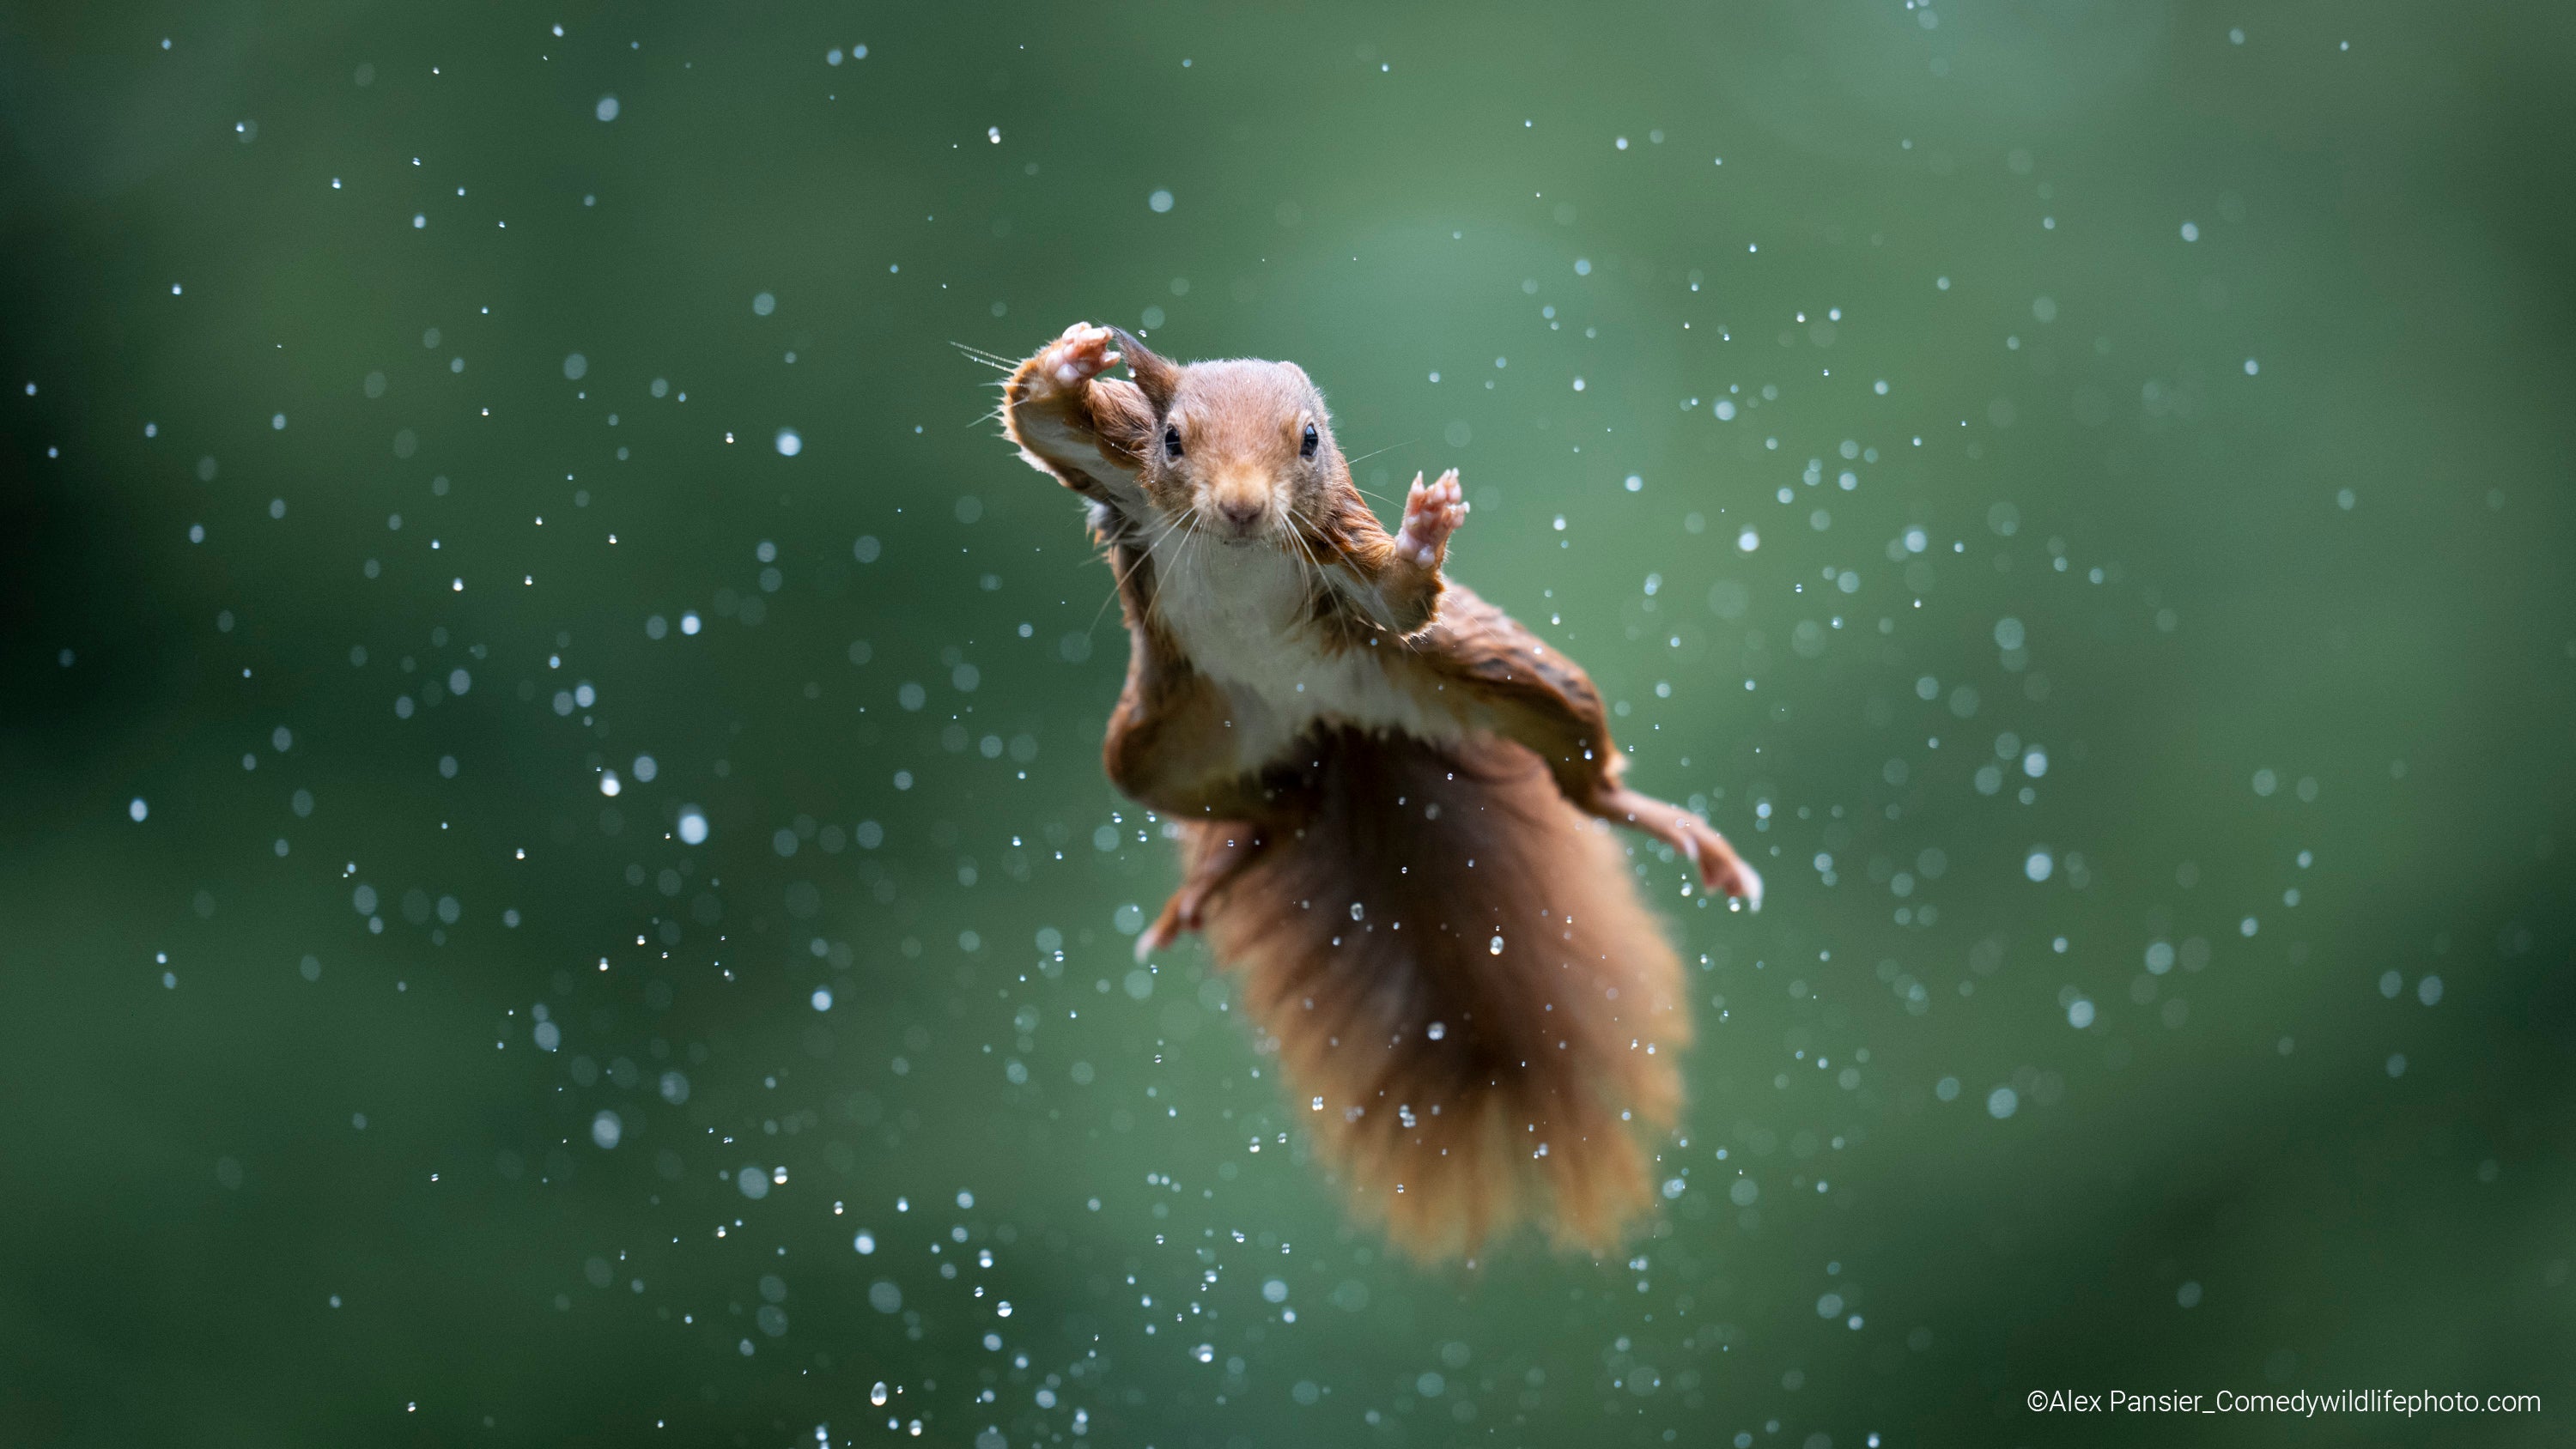 A red squirrel jumping during a rainstorm. (Photo: © Alex Pansier / Comedywildlifephoto.com.)